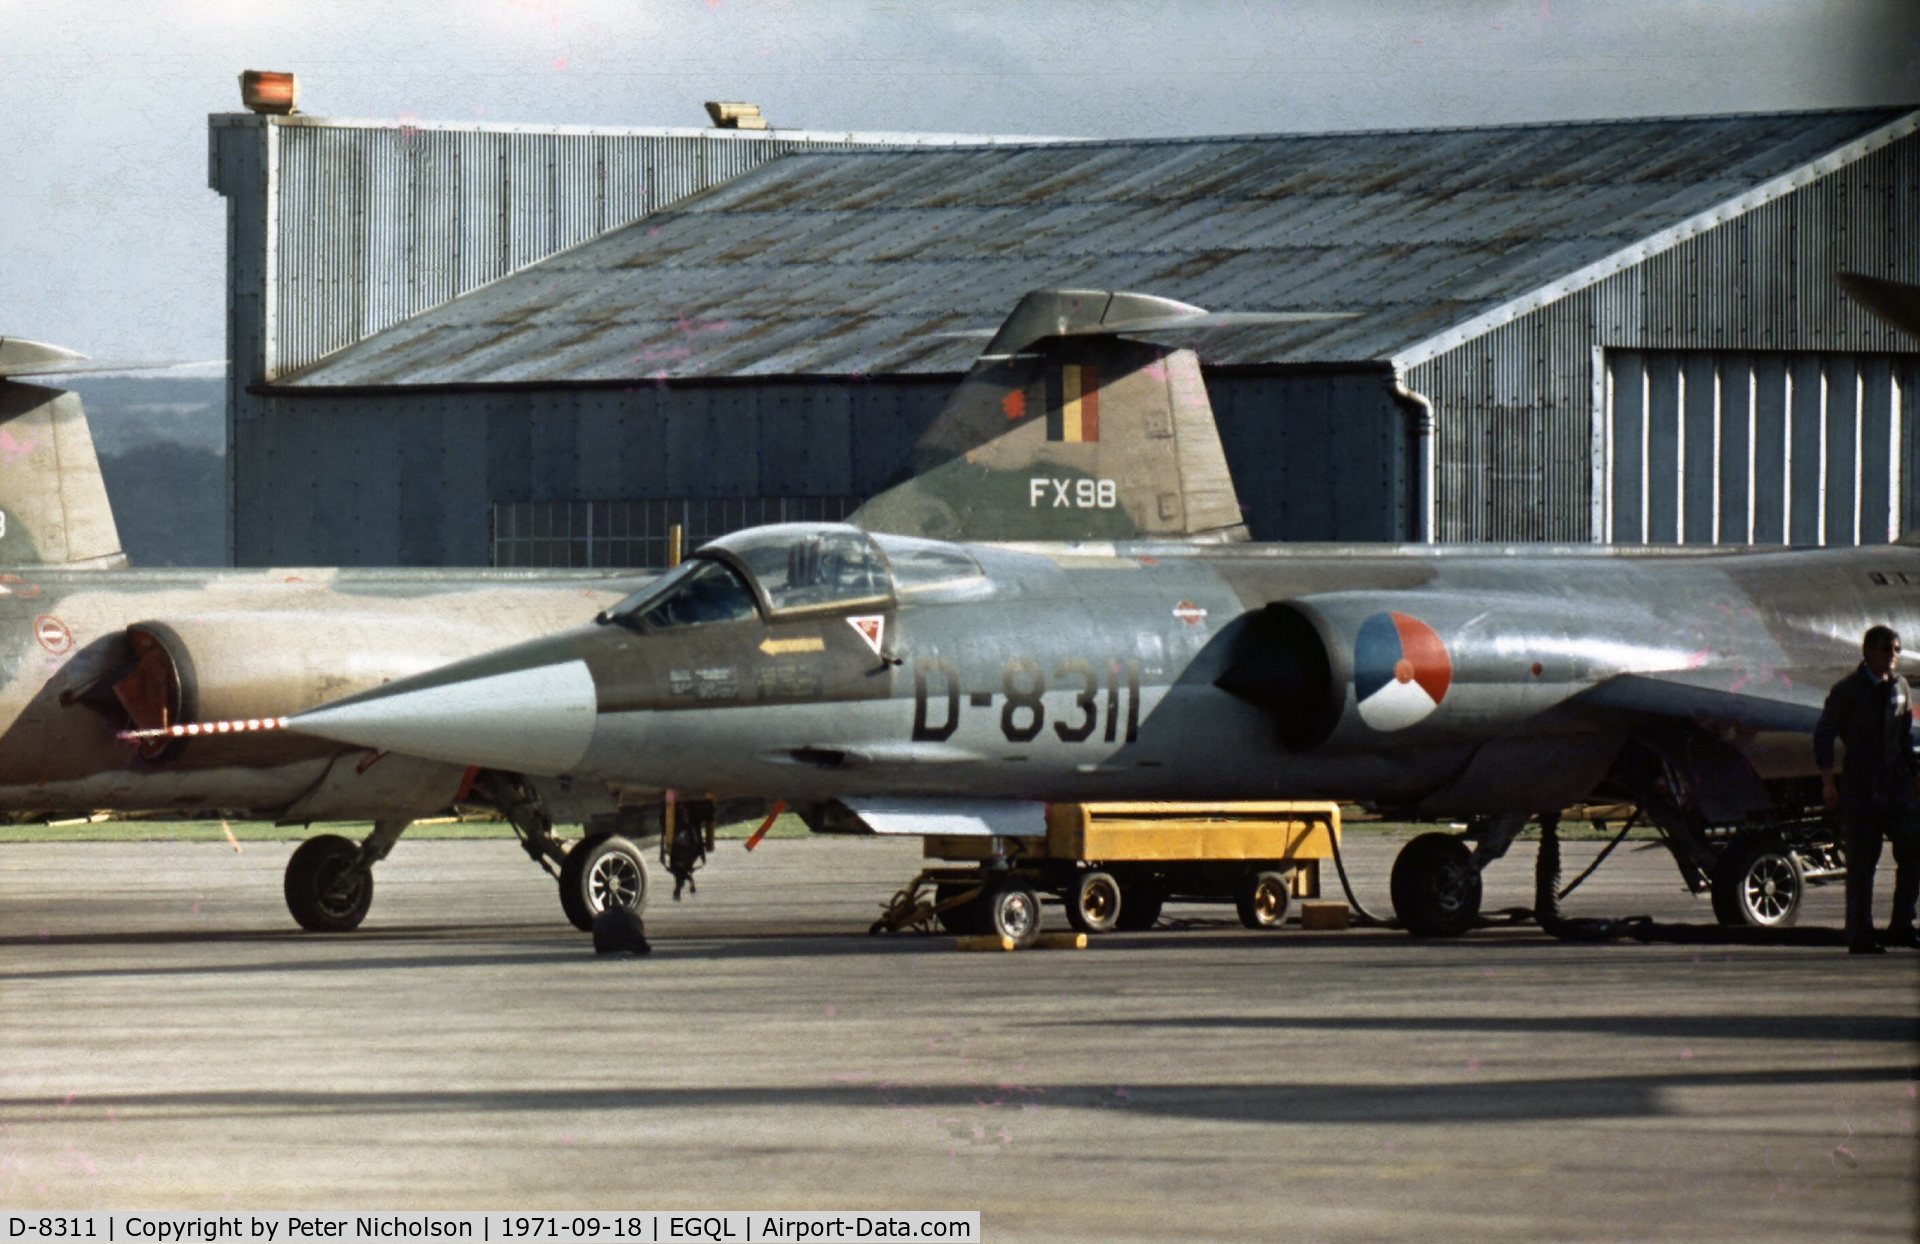 D-8311, Lockheed F-104G Starfighter C/N 683-8311, Royal Netherlands Air Force Starfighter of 322 Squadron on display at the 1971 Leuchars Airshow.